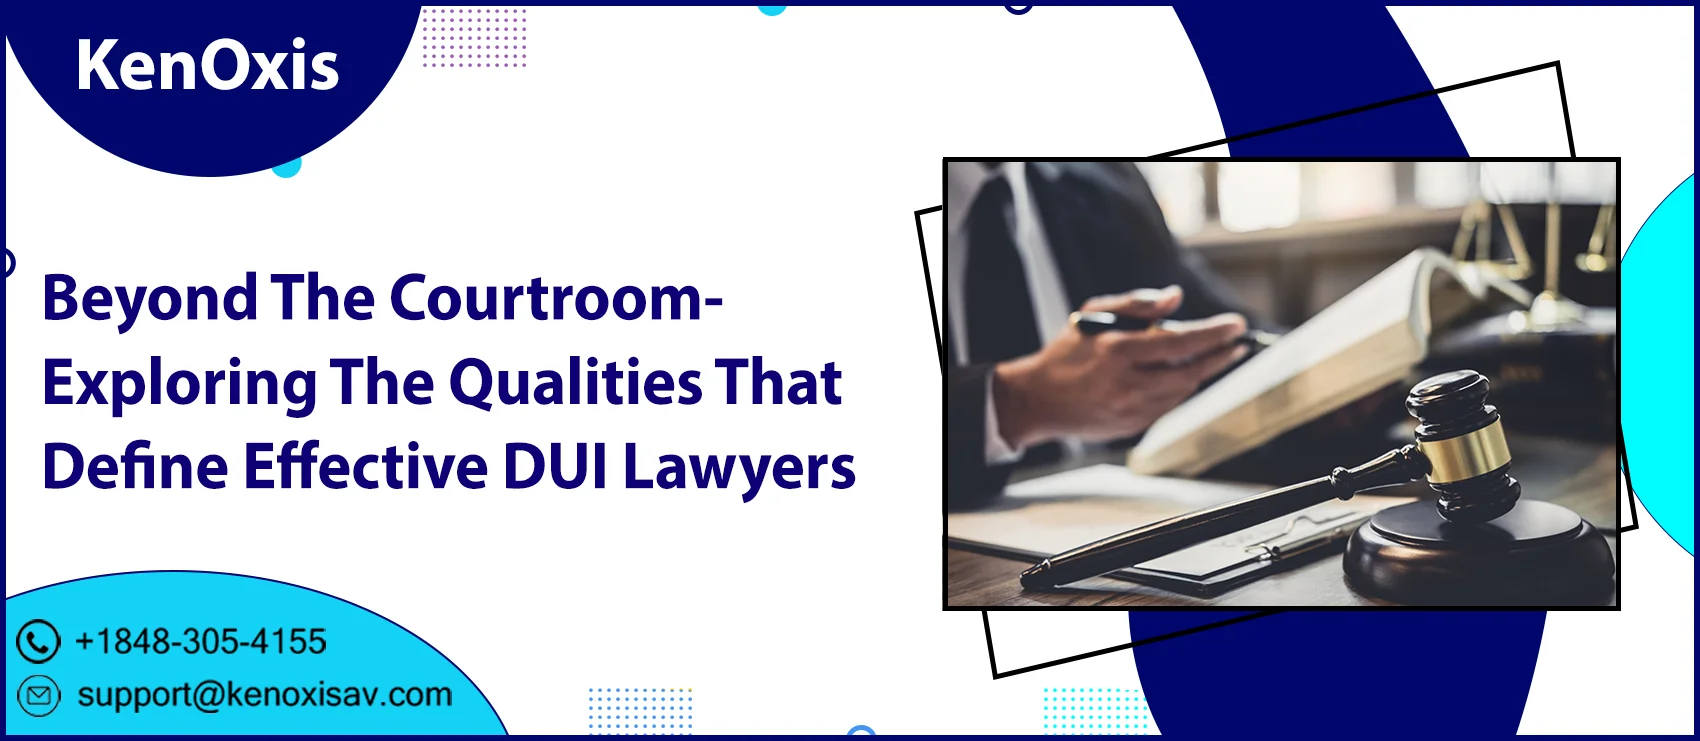 Beyond The Courtroom-Exploring The Qualities That Define Effective DUI Lawyers